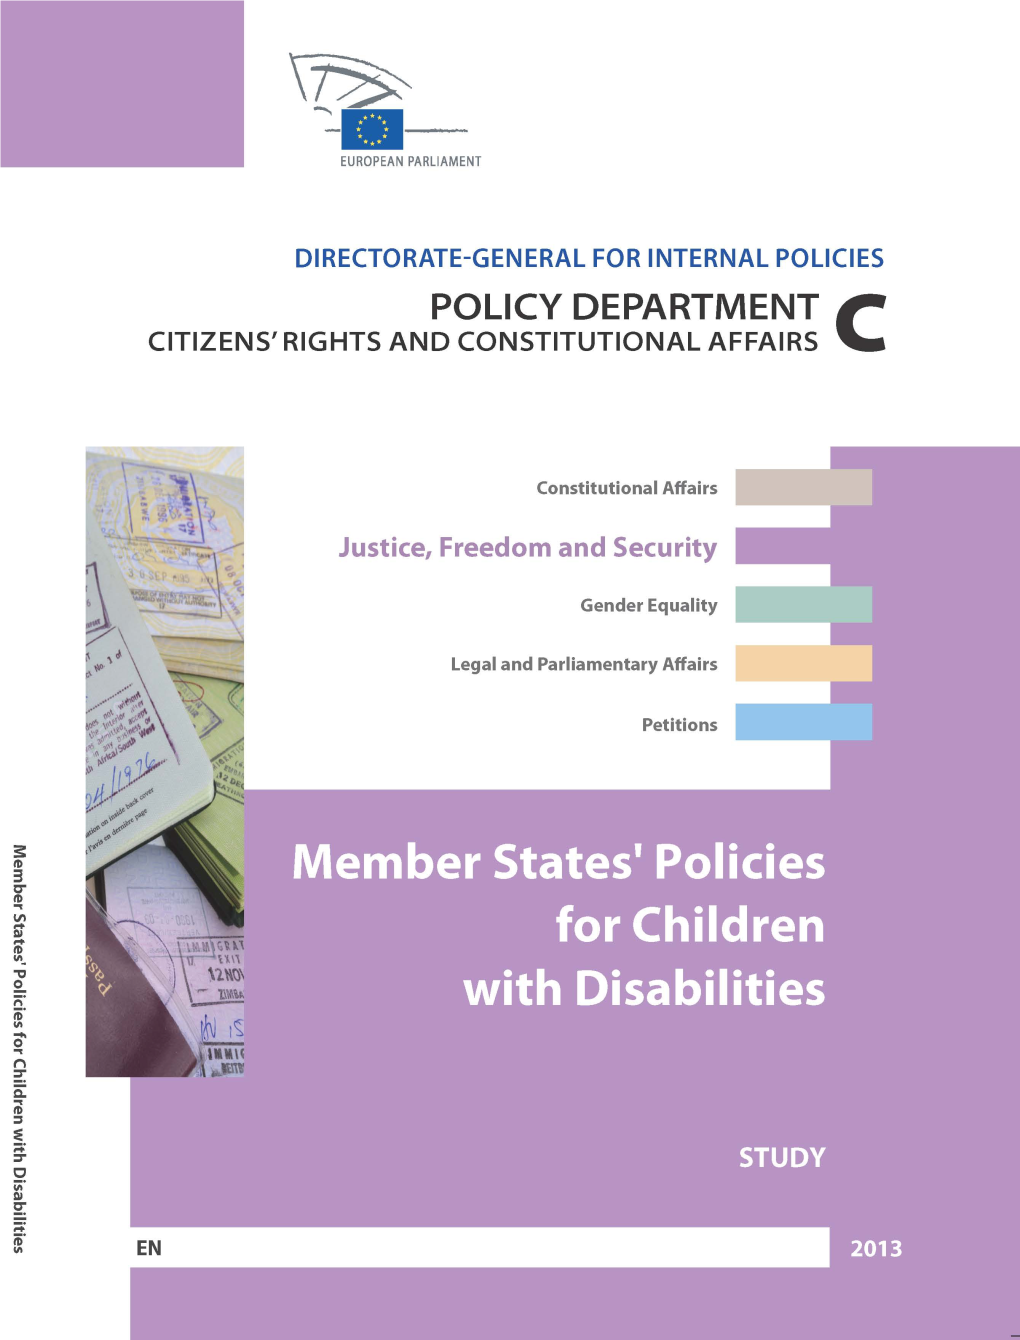 Member States' Policies for Children with Disabilities